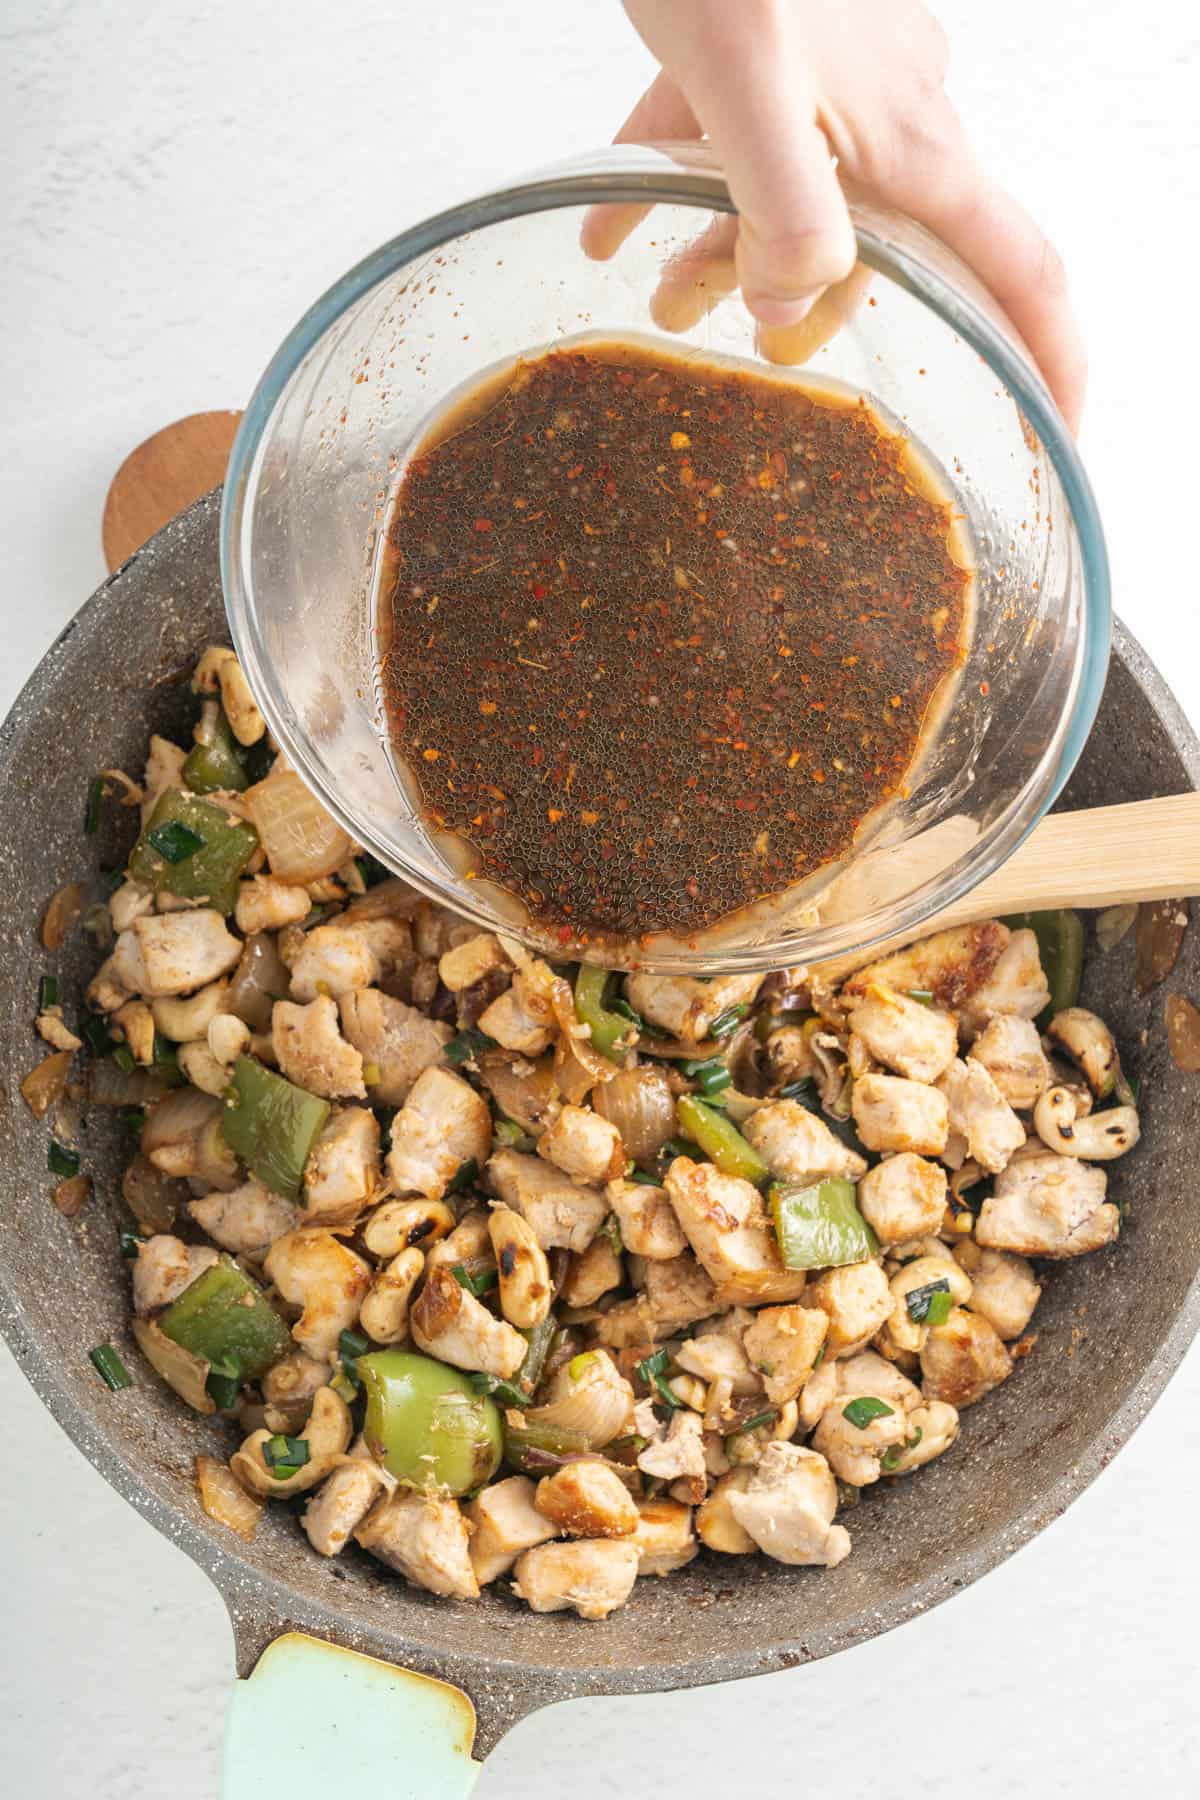 Adding sauce to chunks of cooked chicken, cashews, and vegetables in a pan.